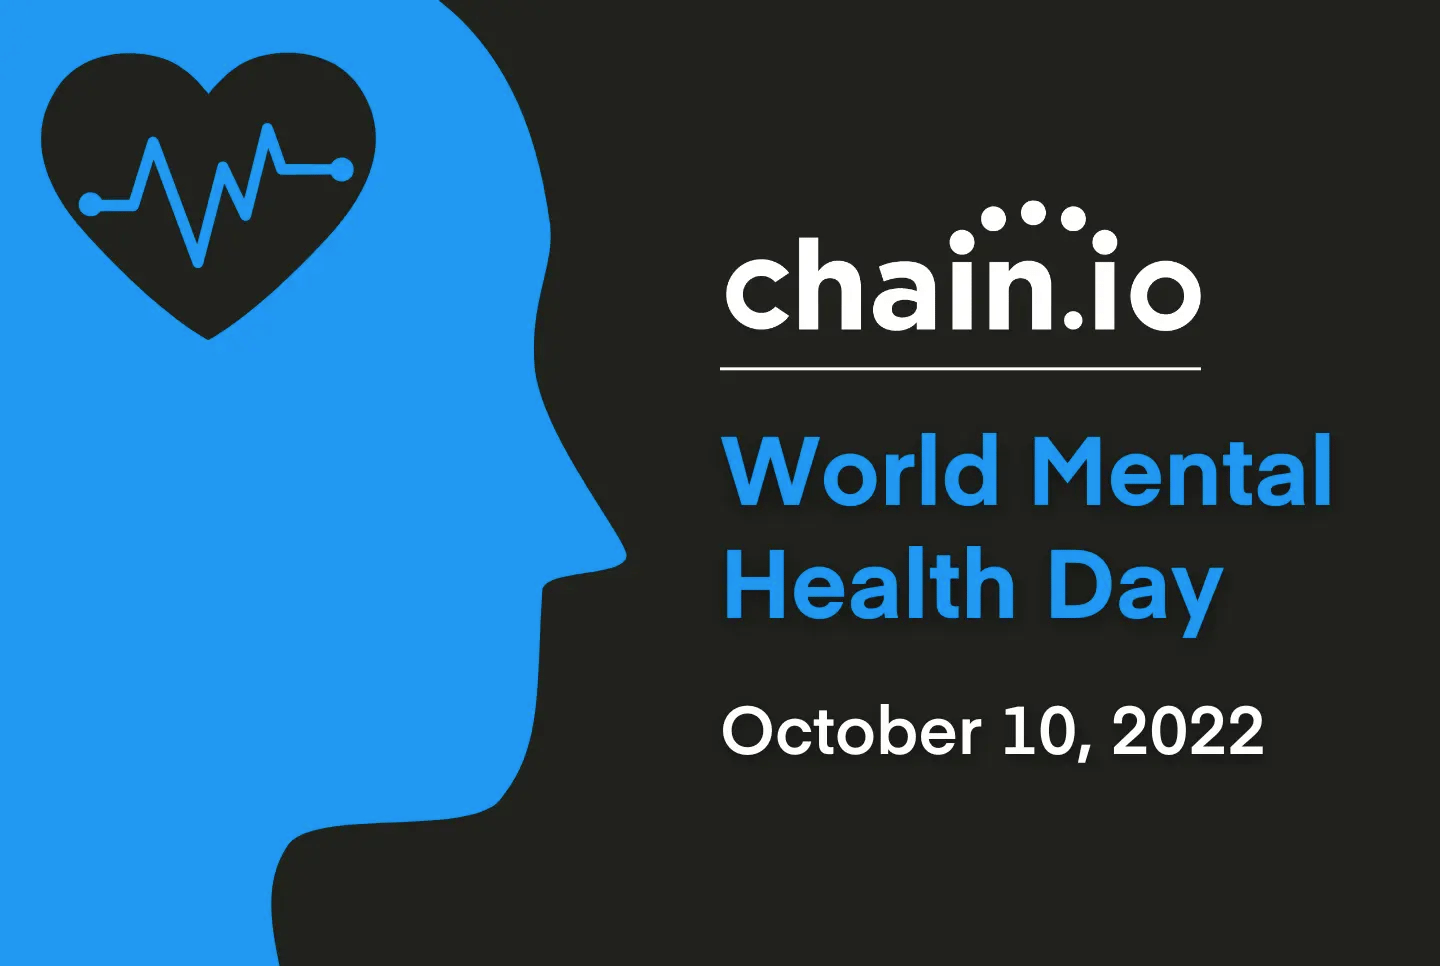 Chain.io celebrates World Mental Health Day and encourages employees to use mental health benefits